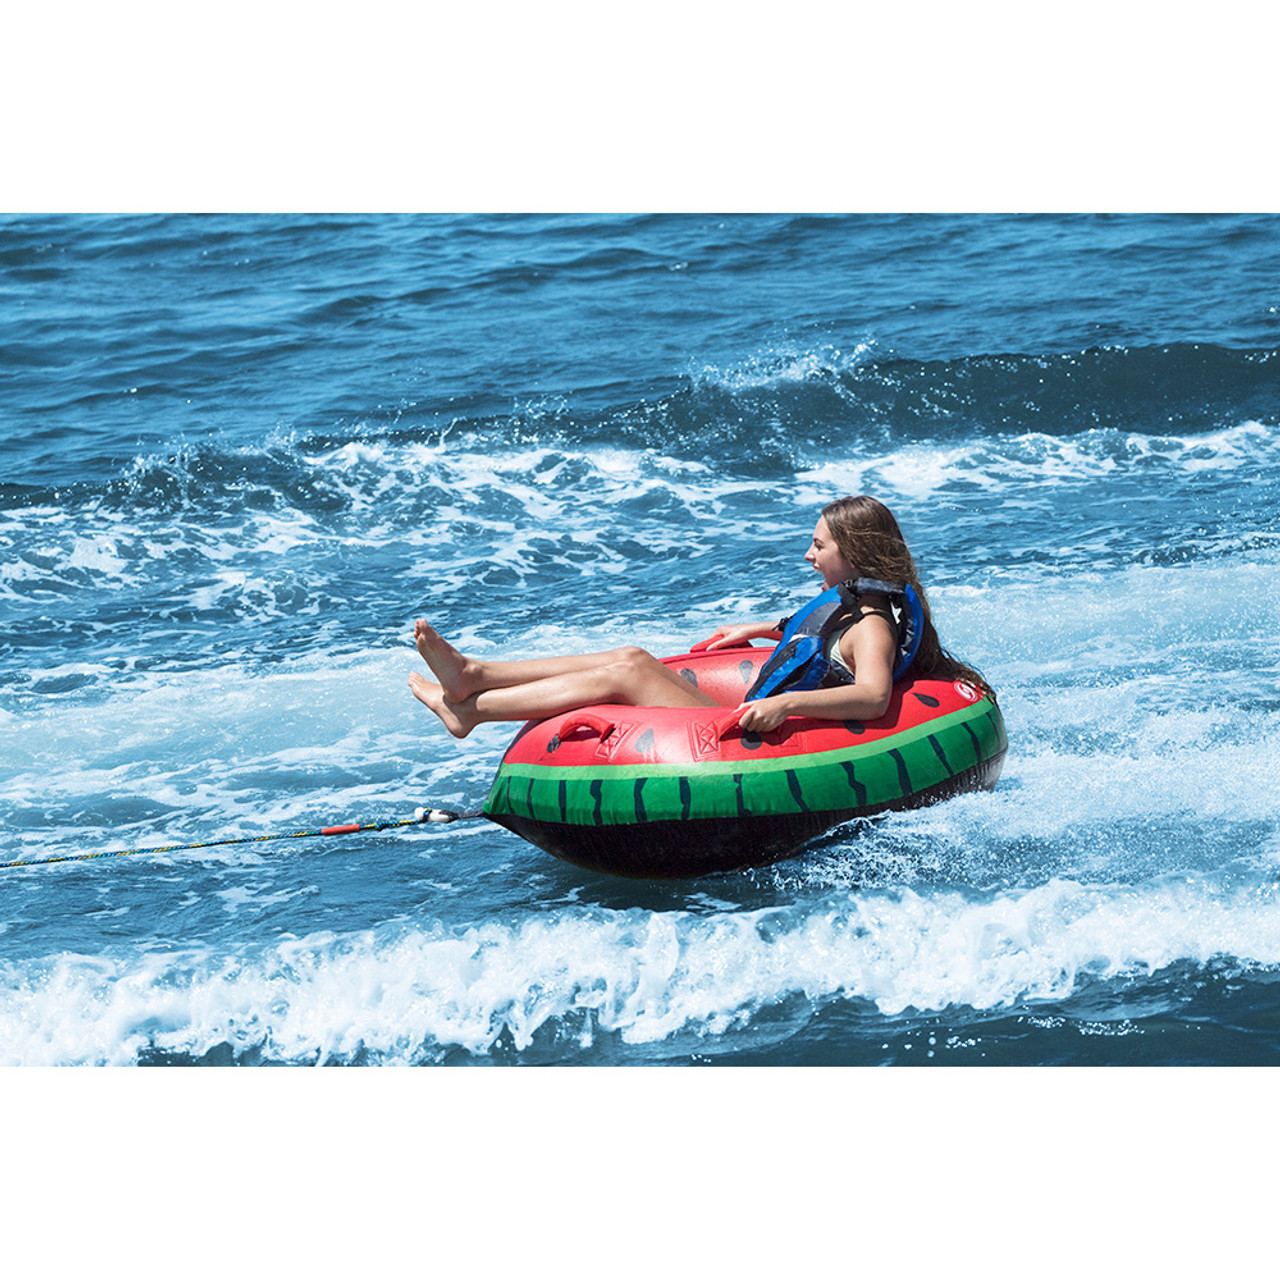 Solstice Watersports Single Rider Watermelon Tube Towable [22005]